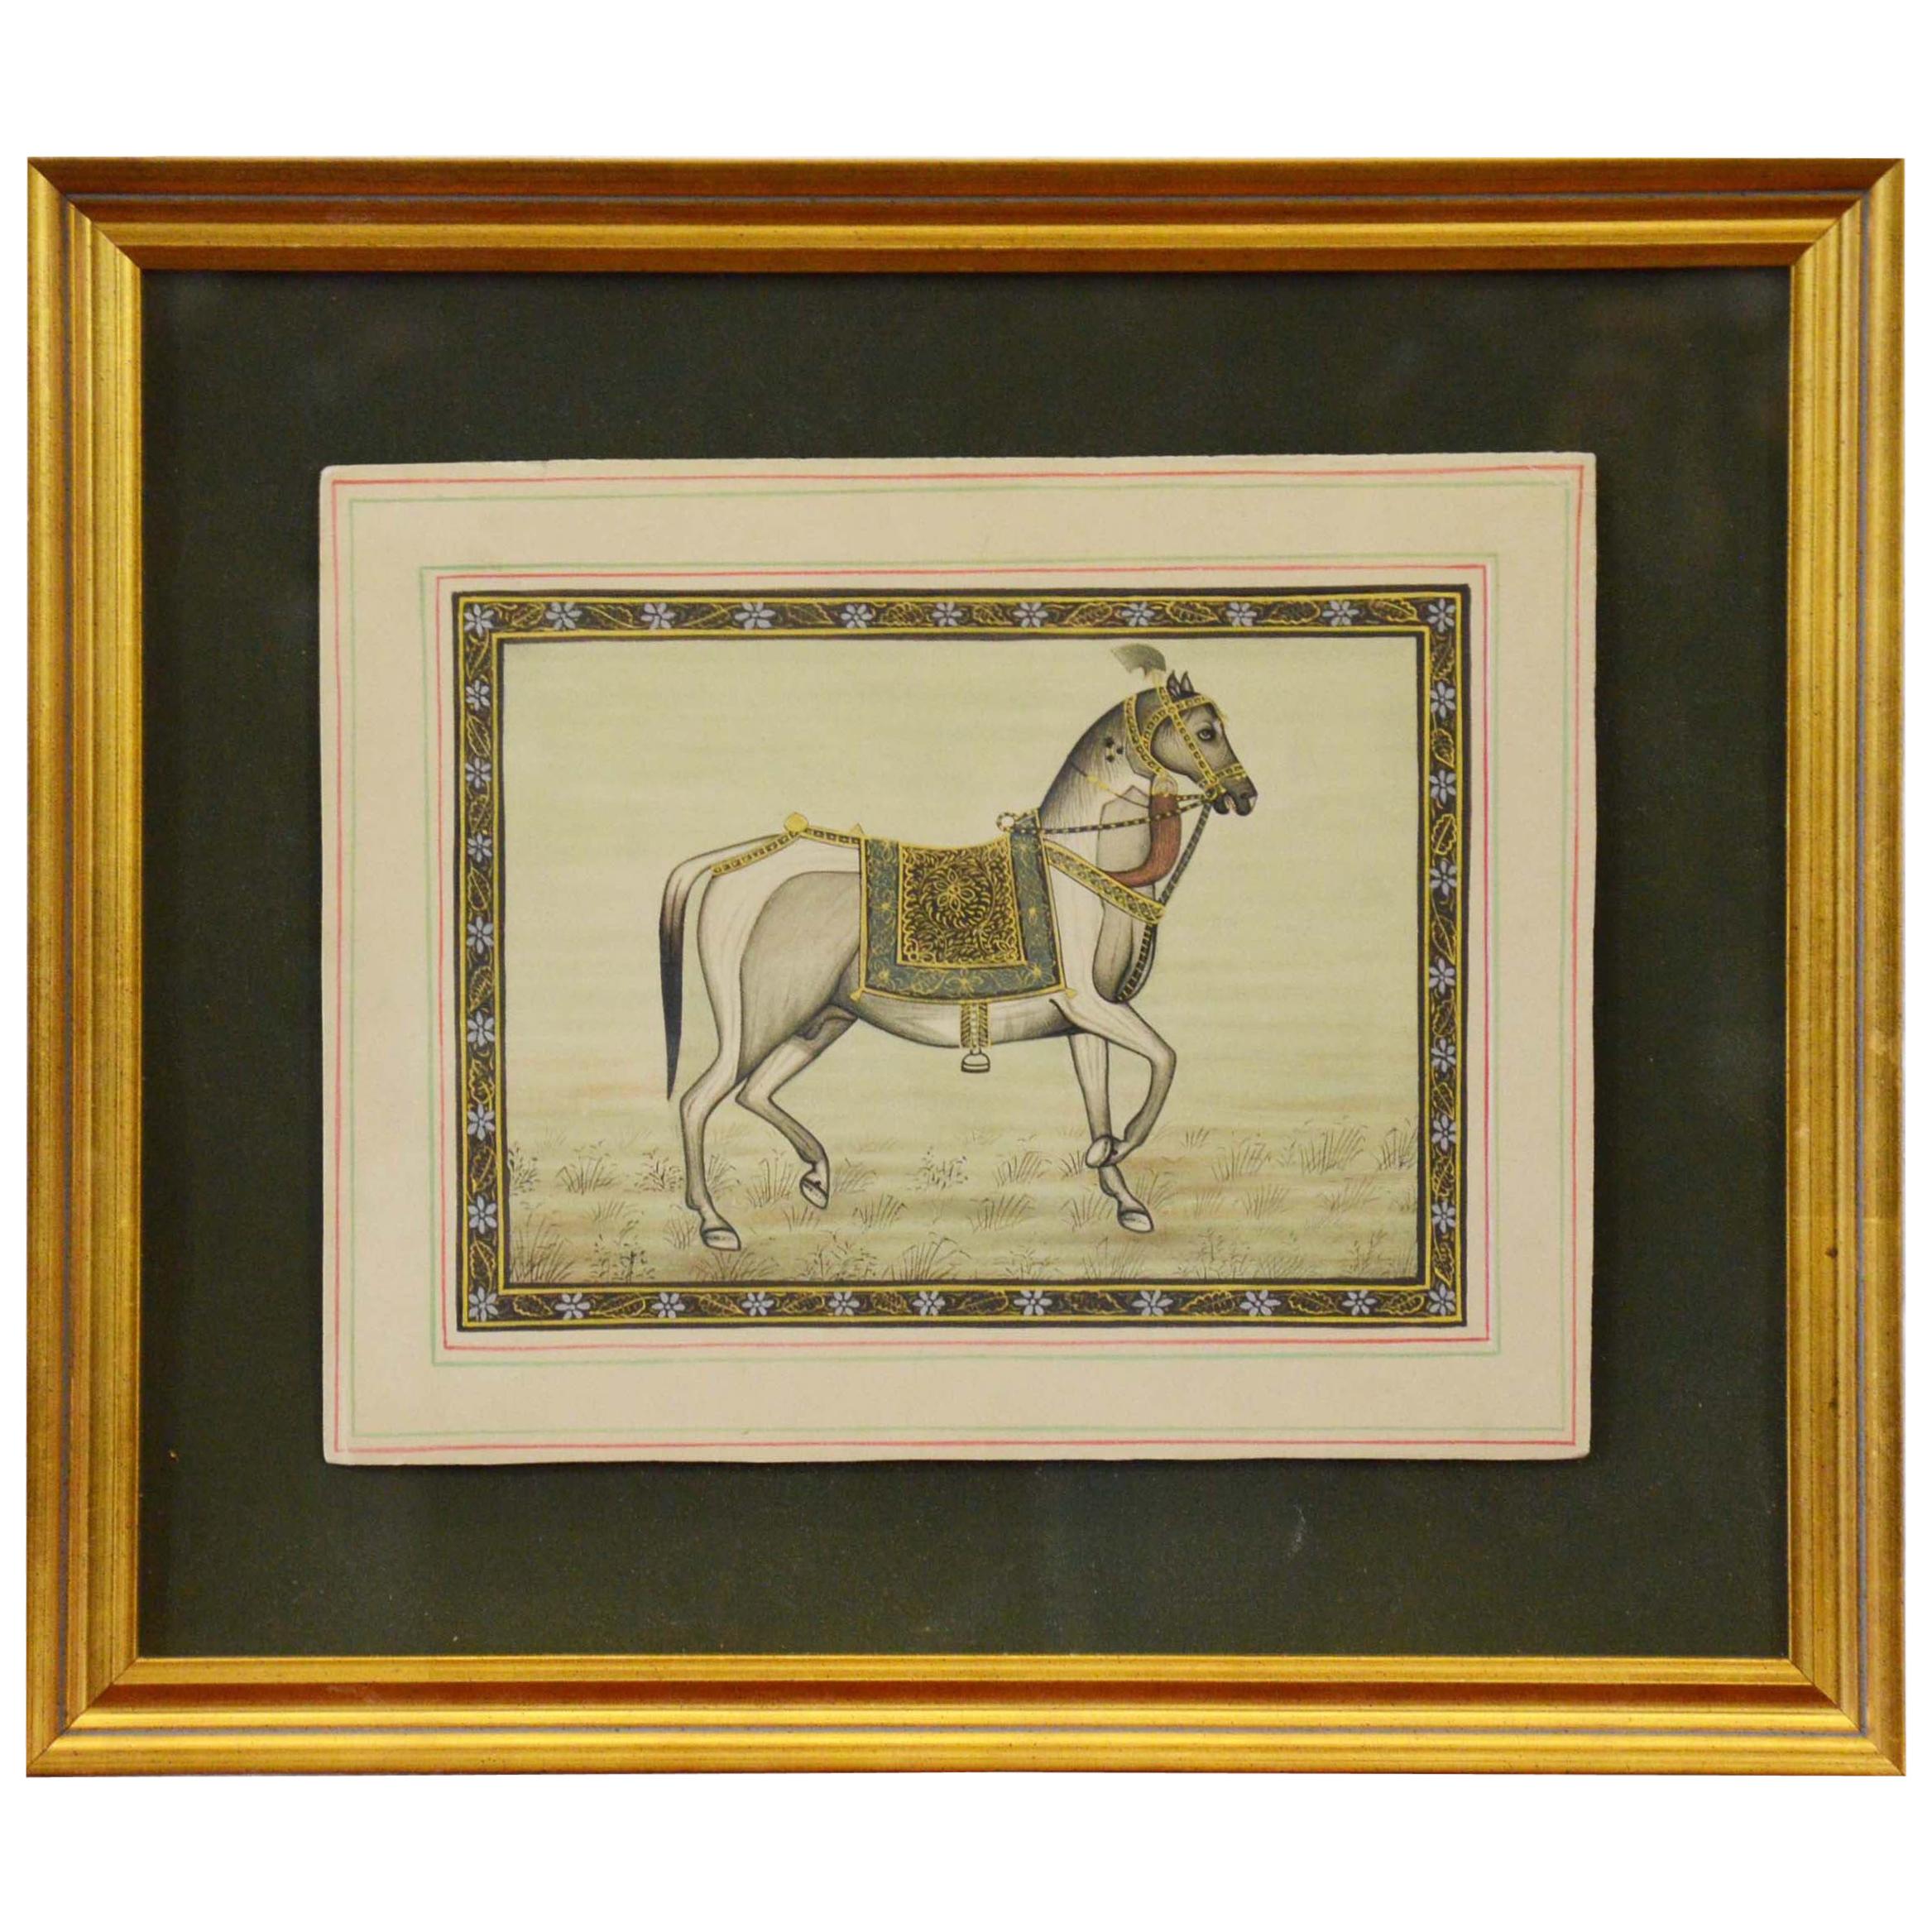 Vintage Indian Hand-Painted Mogul Style Horse Painting on Silk Paper with Frame